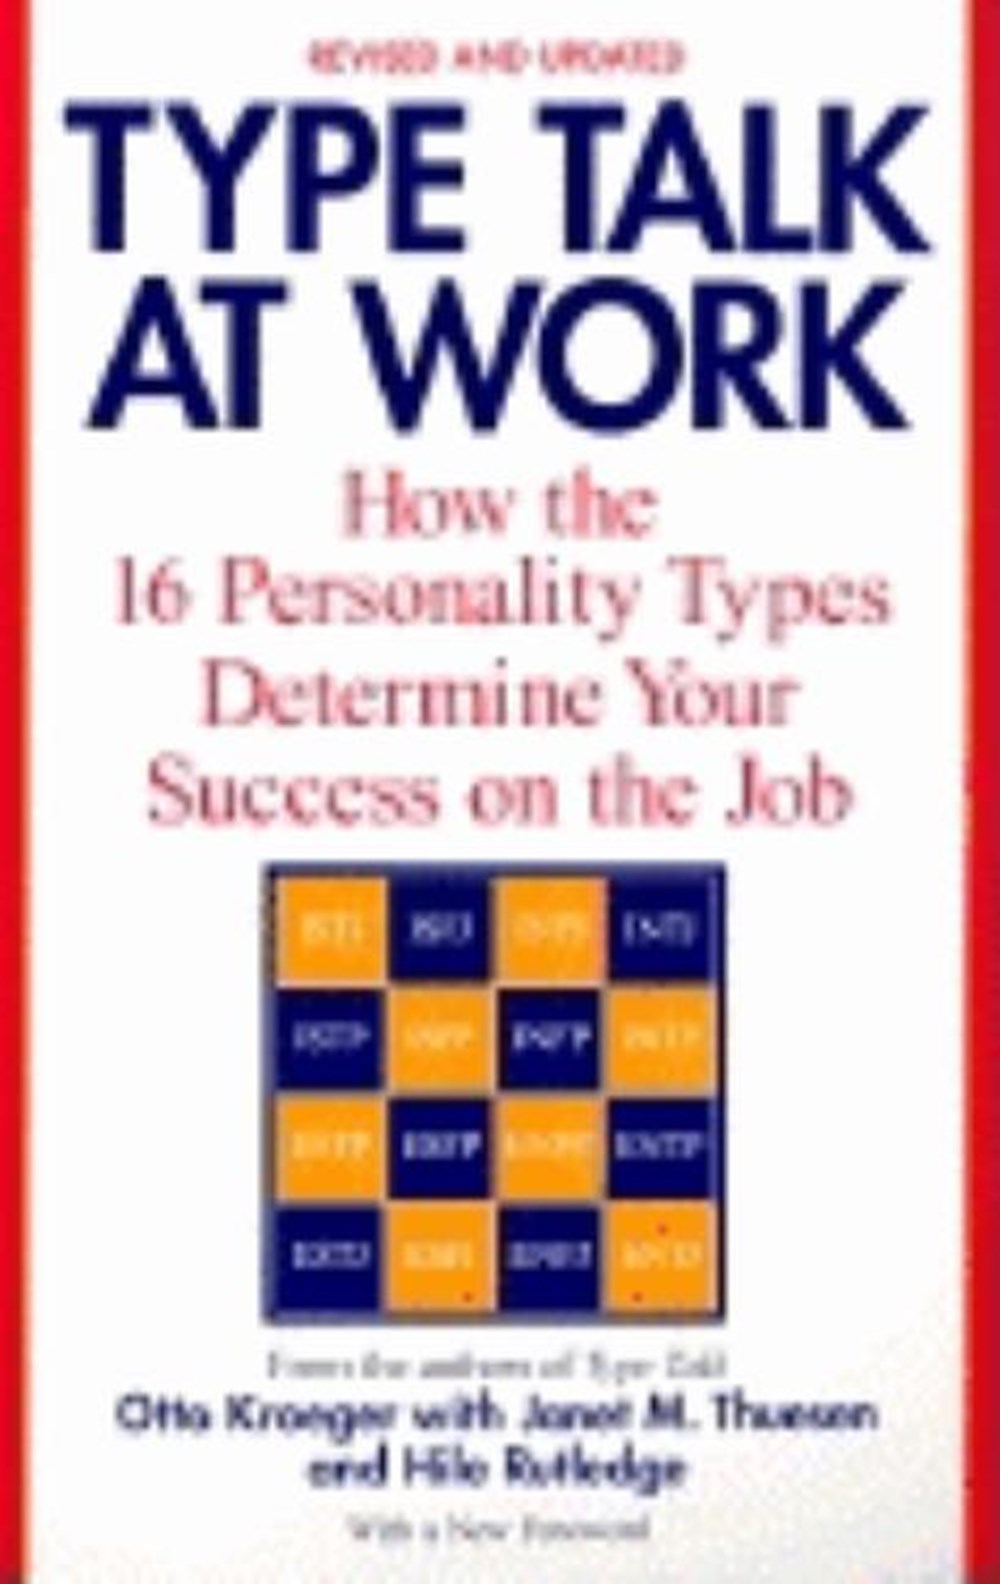 Type Talk at Work (Revised): How the 16 Personality Types Determine Your Success on the Job (Revised